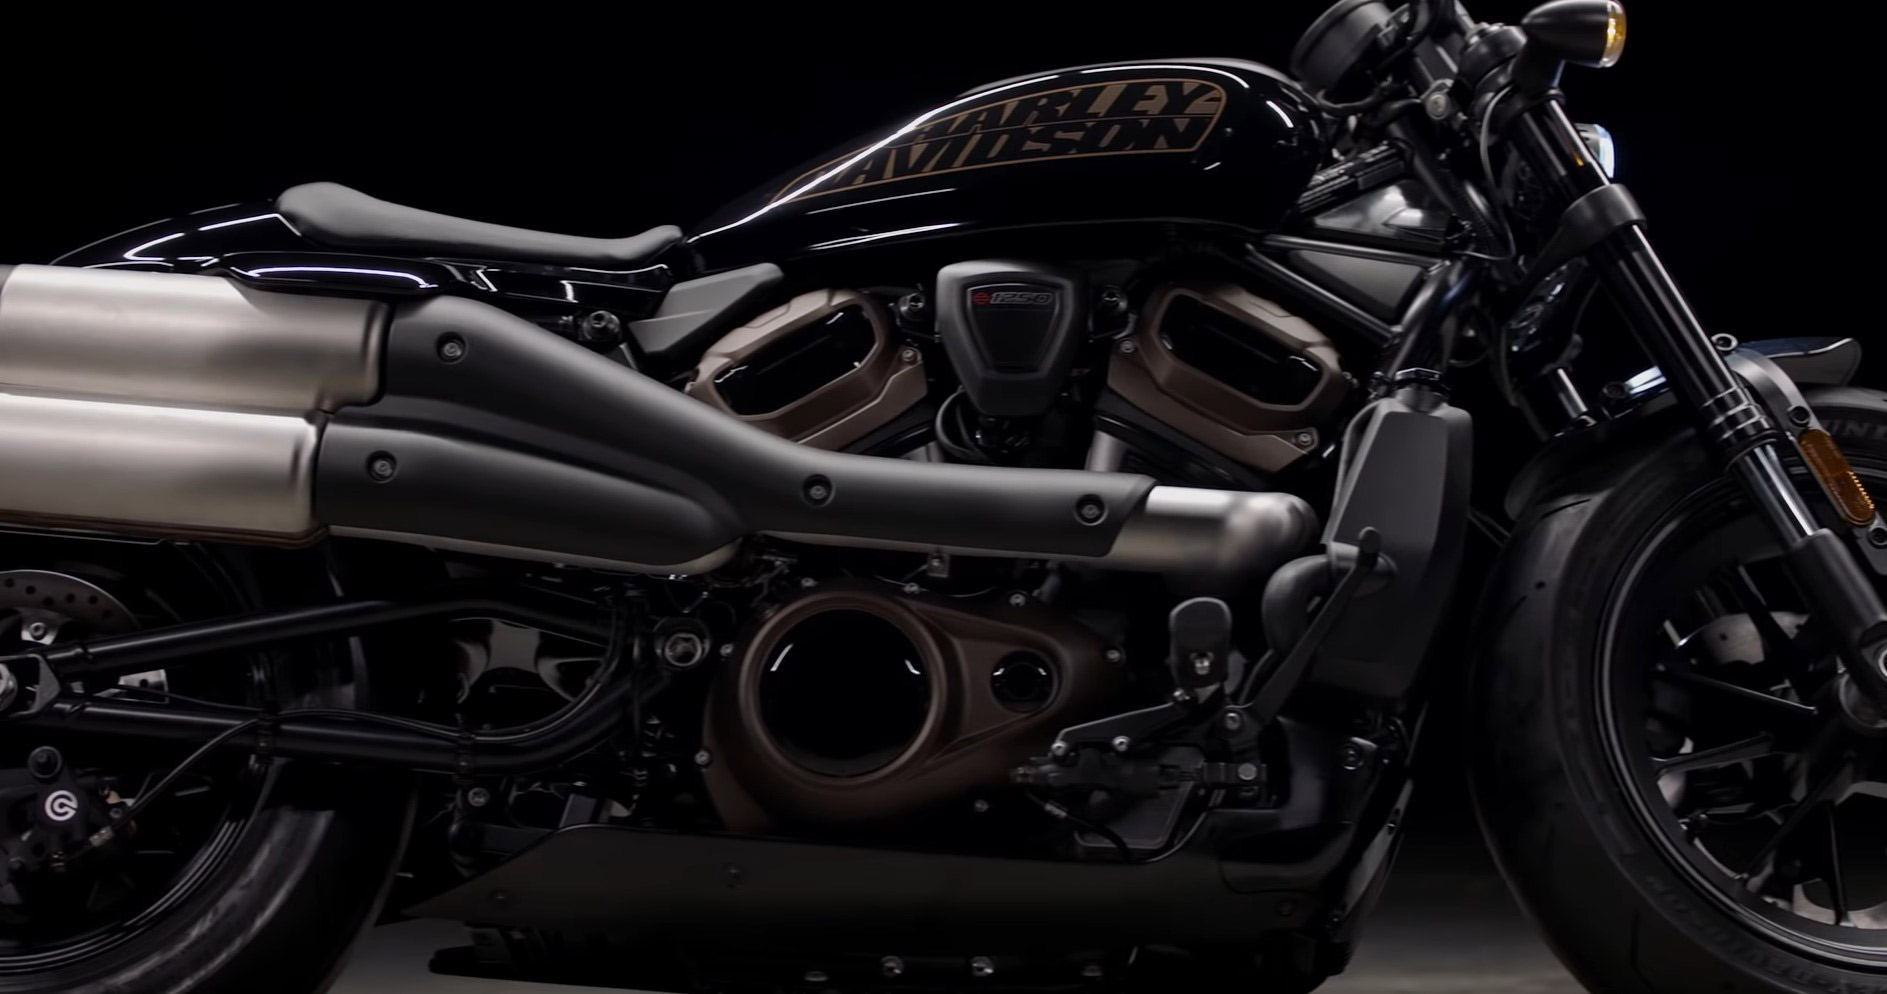 Harley Davidson Sportster S Name And Details Revealed Cycle World